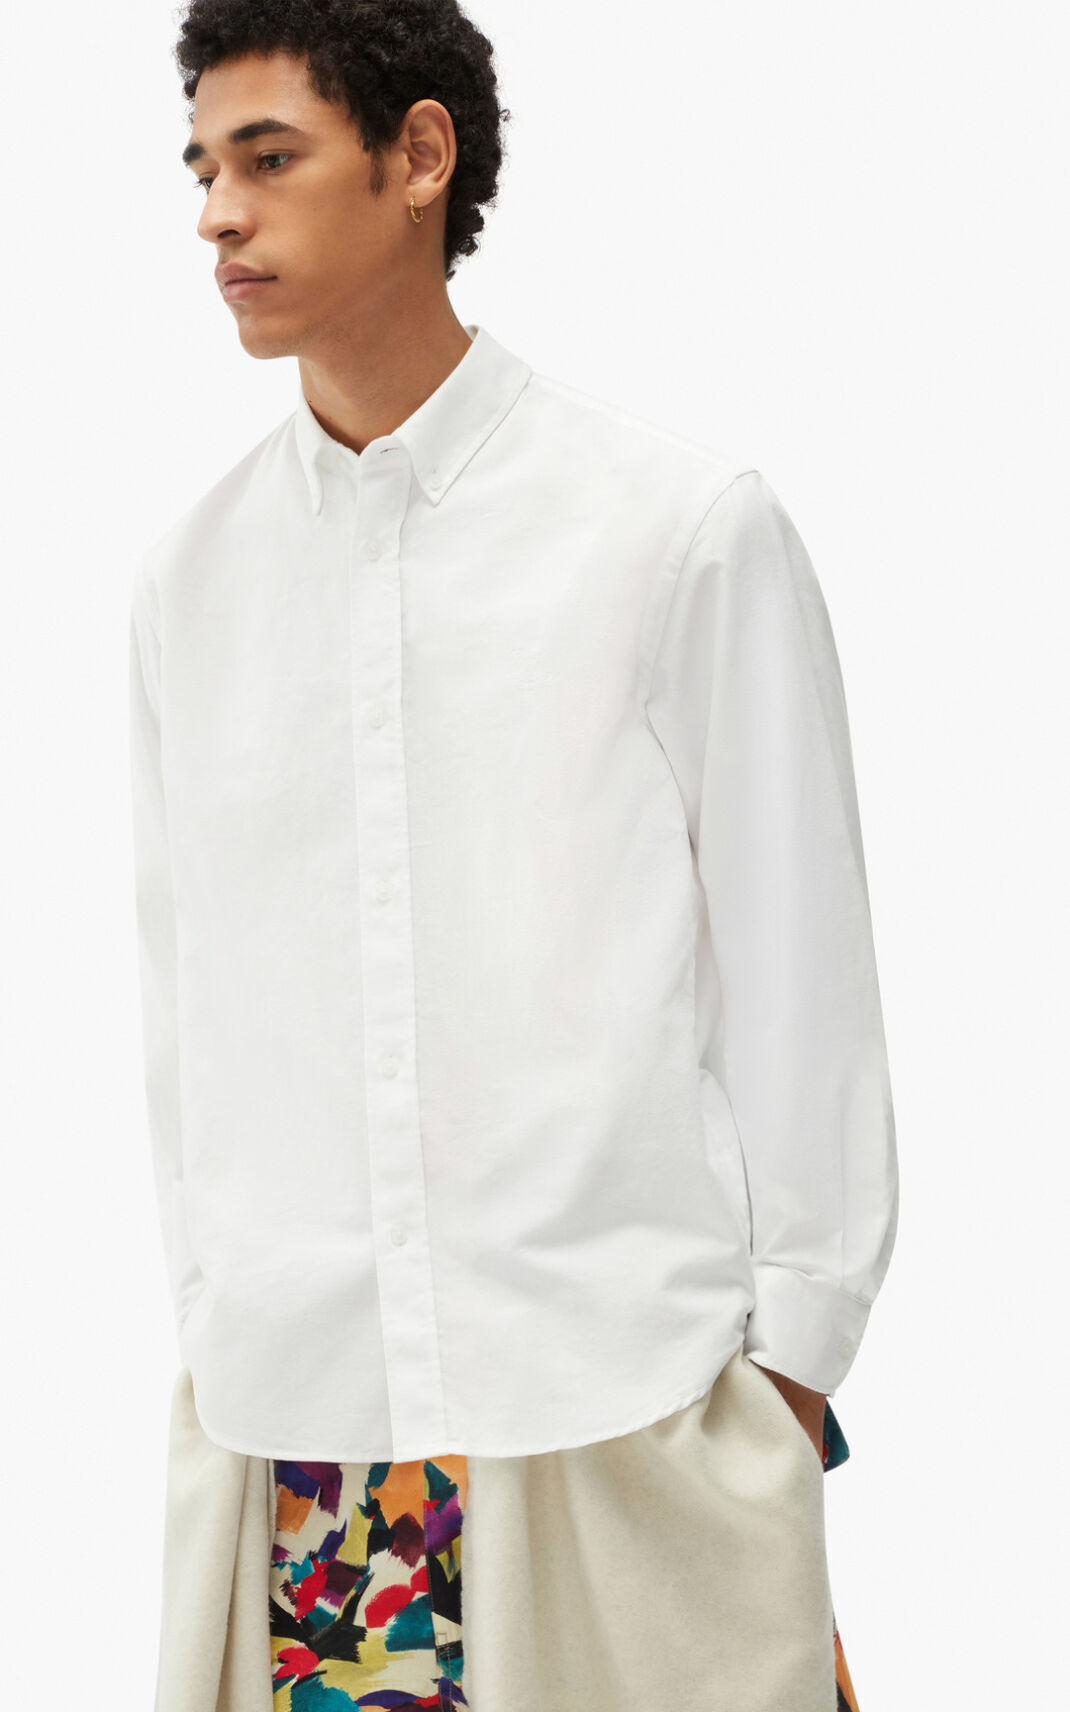 Kenzo Tiger Crest casual Shirt White For Mens 9318MLJWT